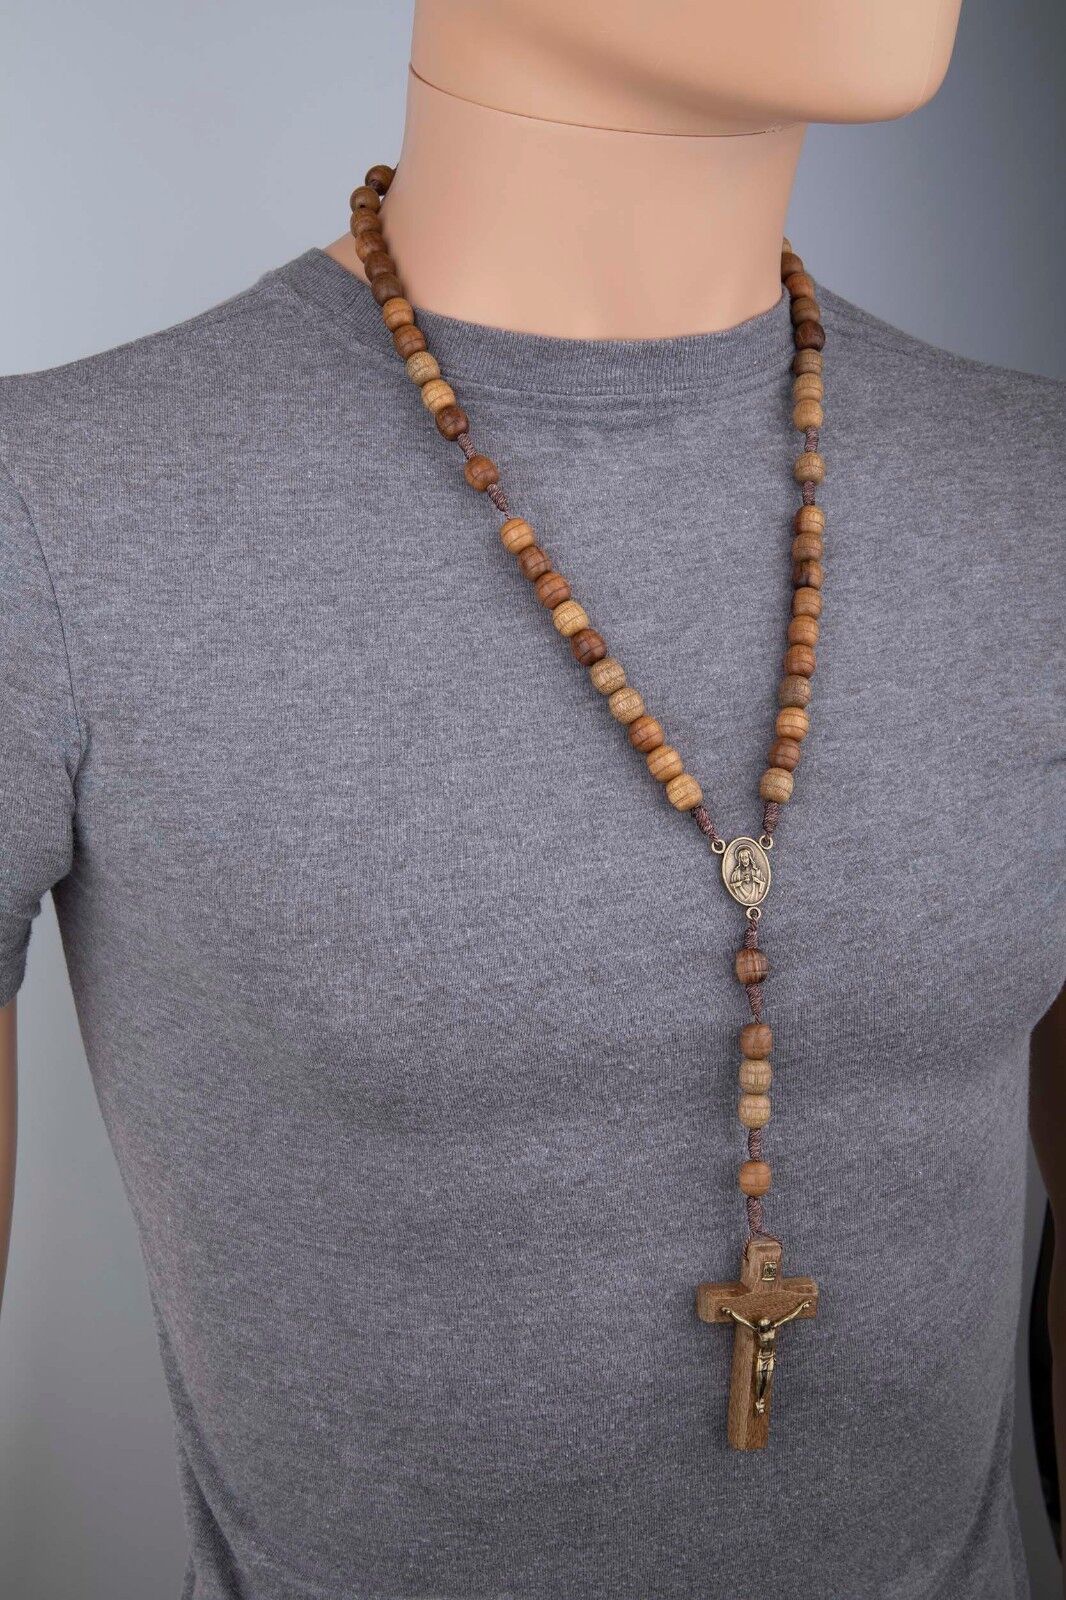 Rosary Necklace for Men Wooden Brown Carved Beads Strong Cord Rope Catholic